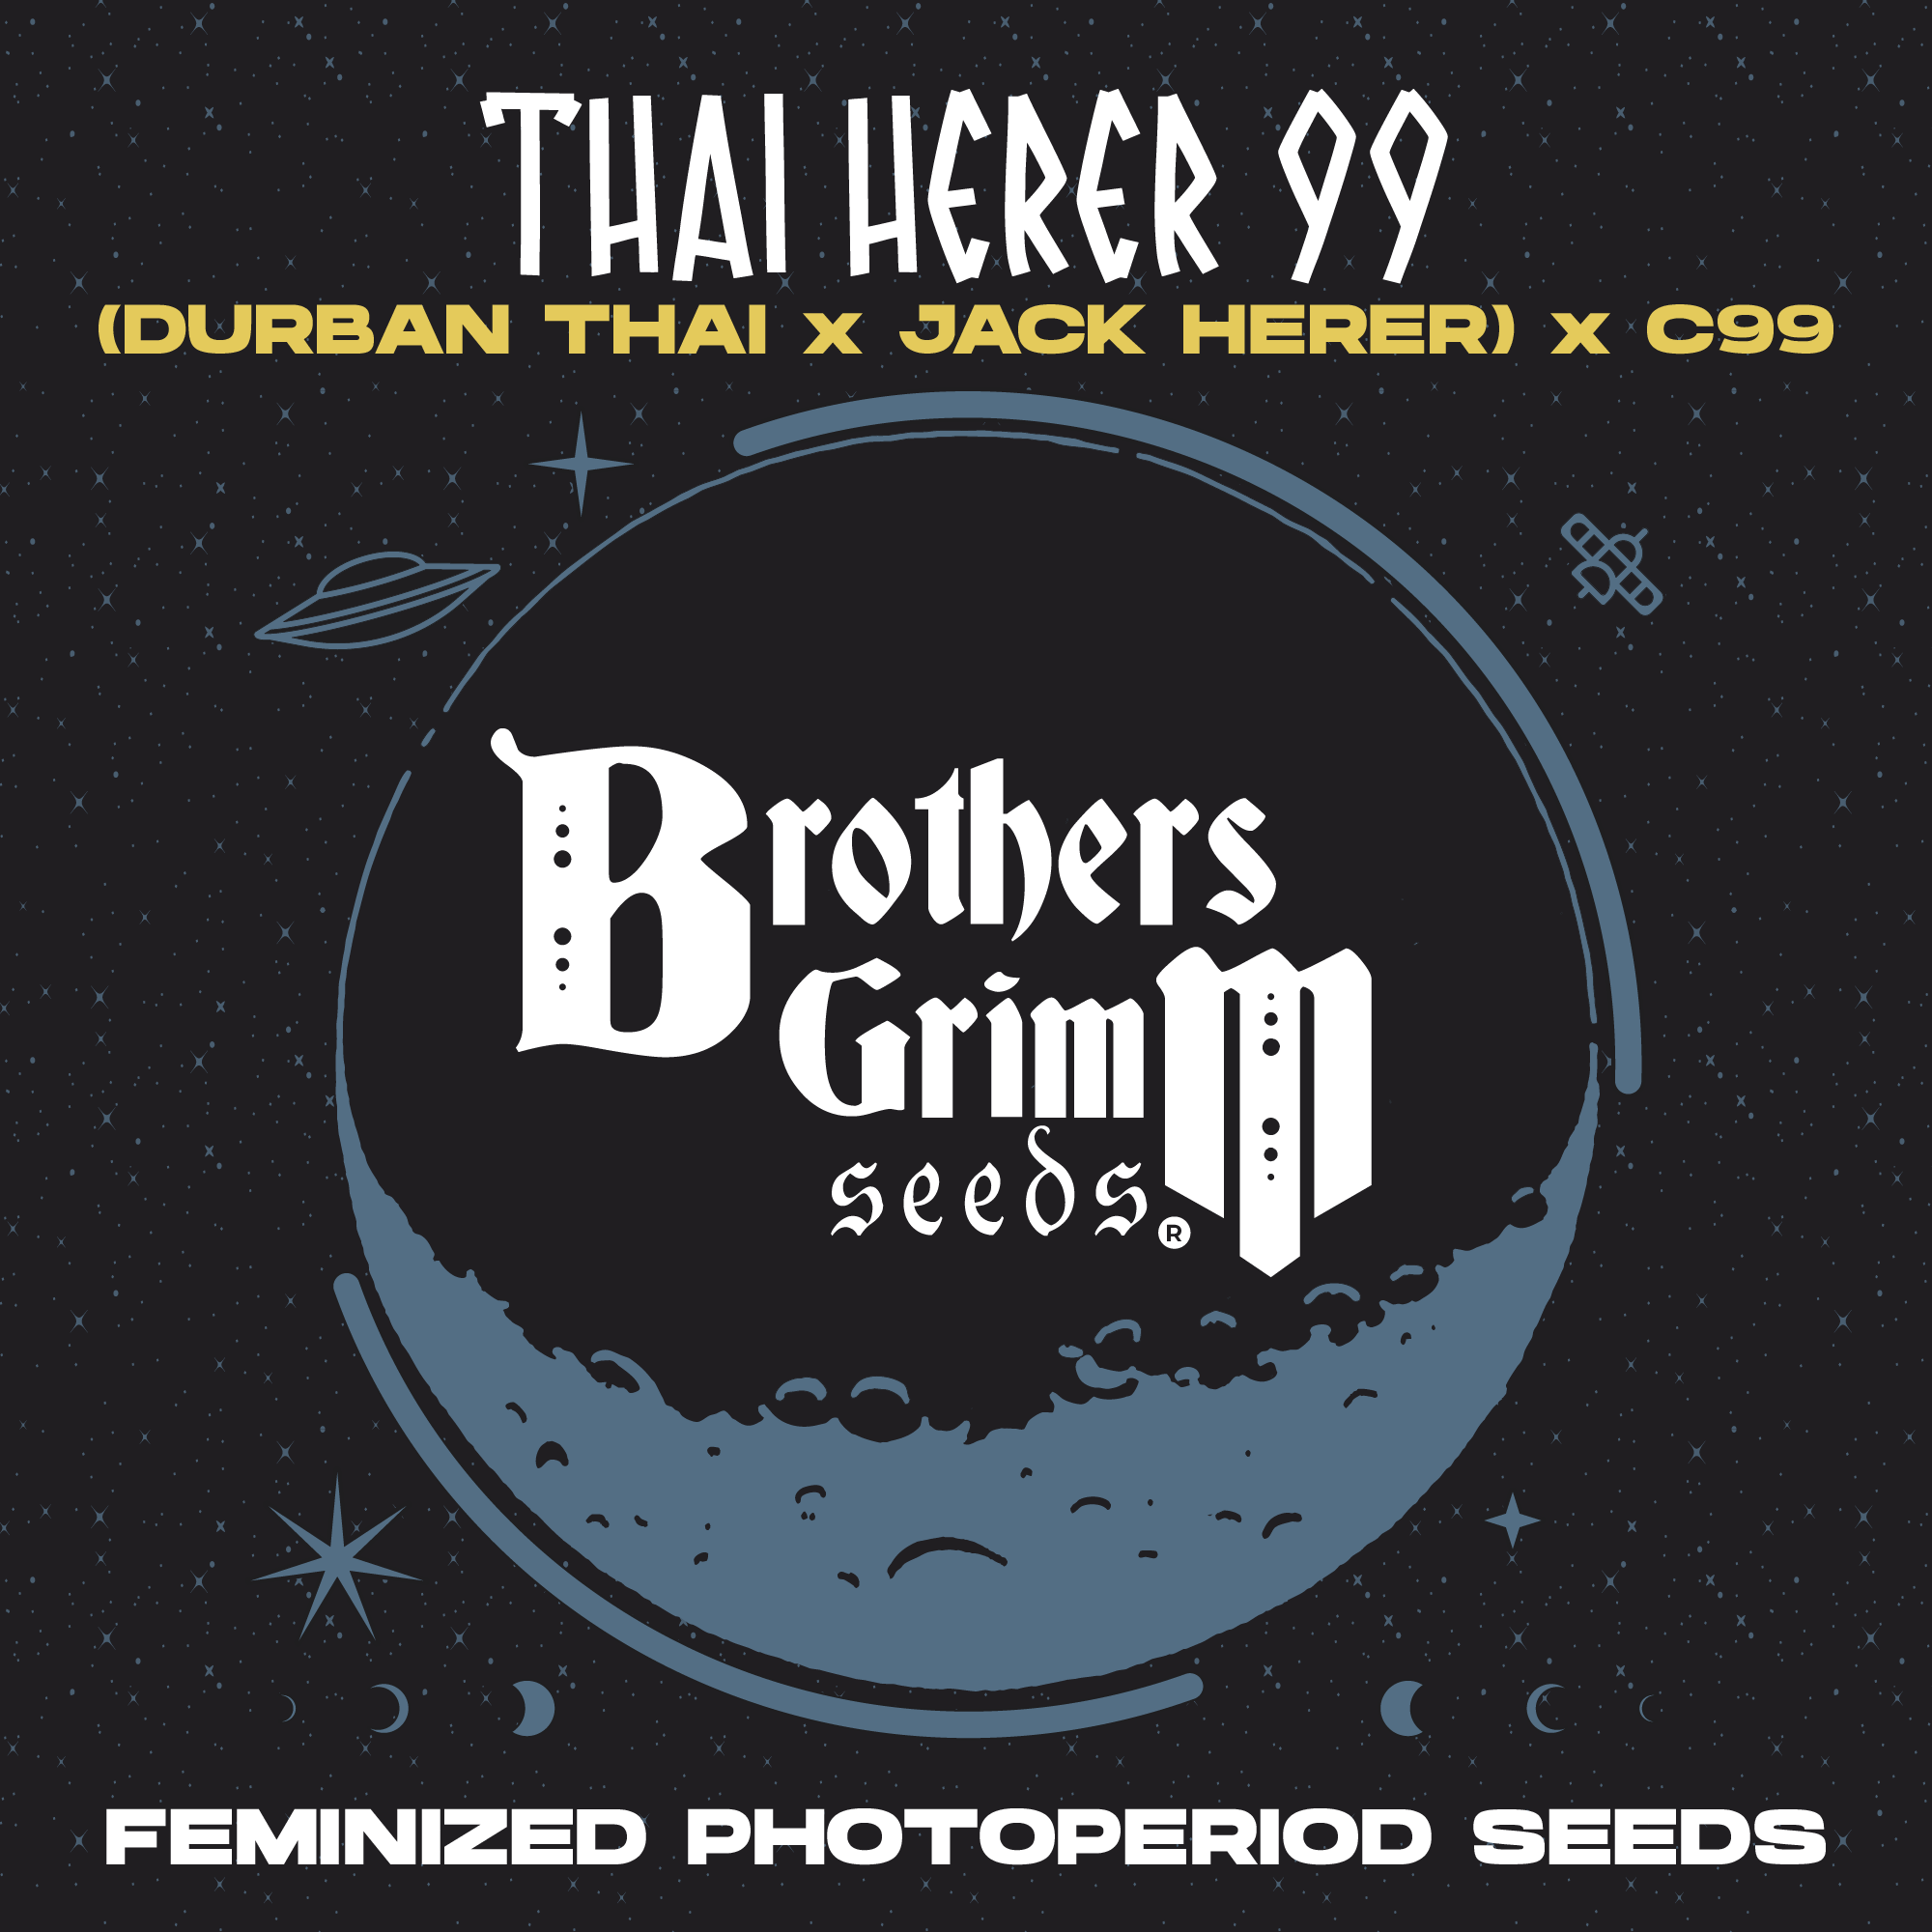 ThaiHerer99-Strain-by-Brothers-Grimm-Seeds